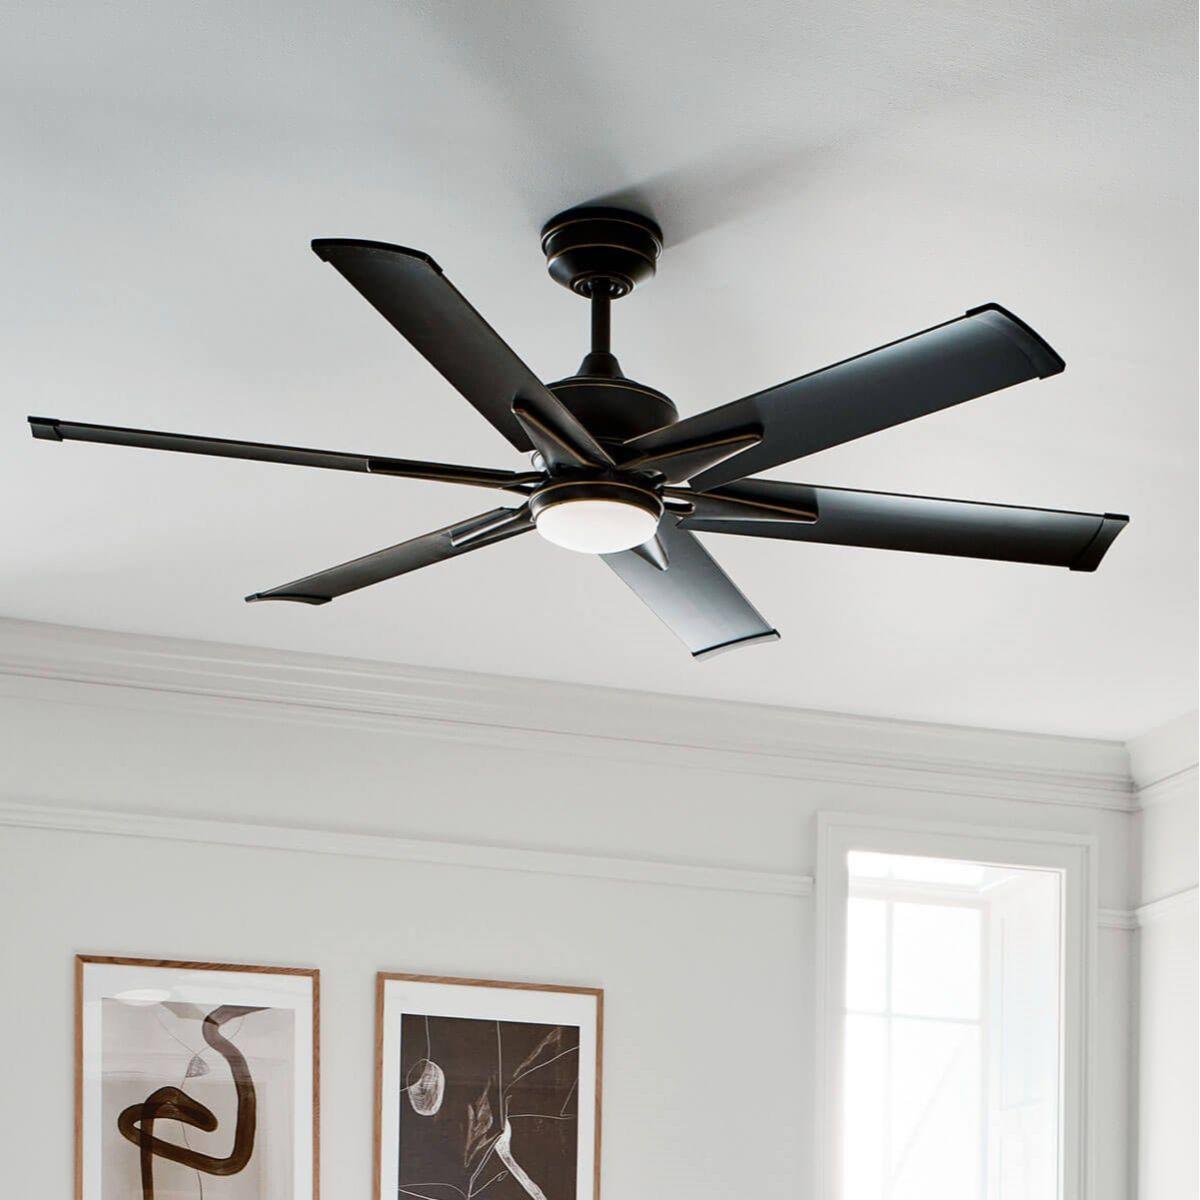 Szeplo Patio 60 Inch Windmill Outdoor Ceiling Fan With Light, Wall Control Included - Bees Lighting